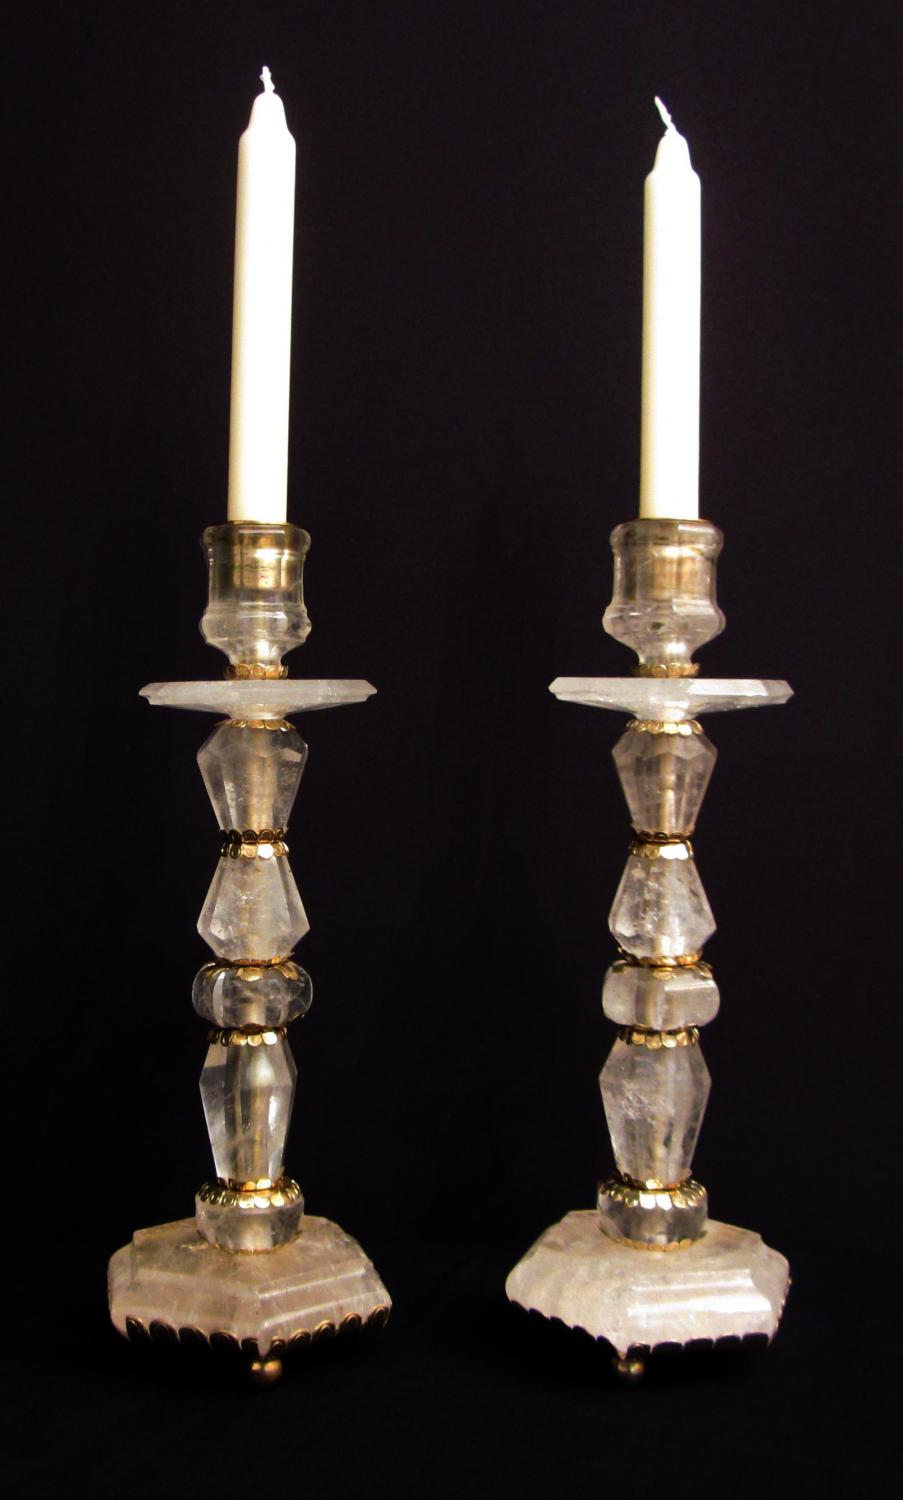 A pair of solid rock crystal candlesticks